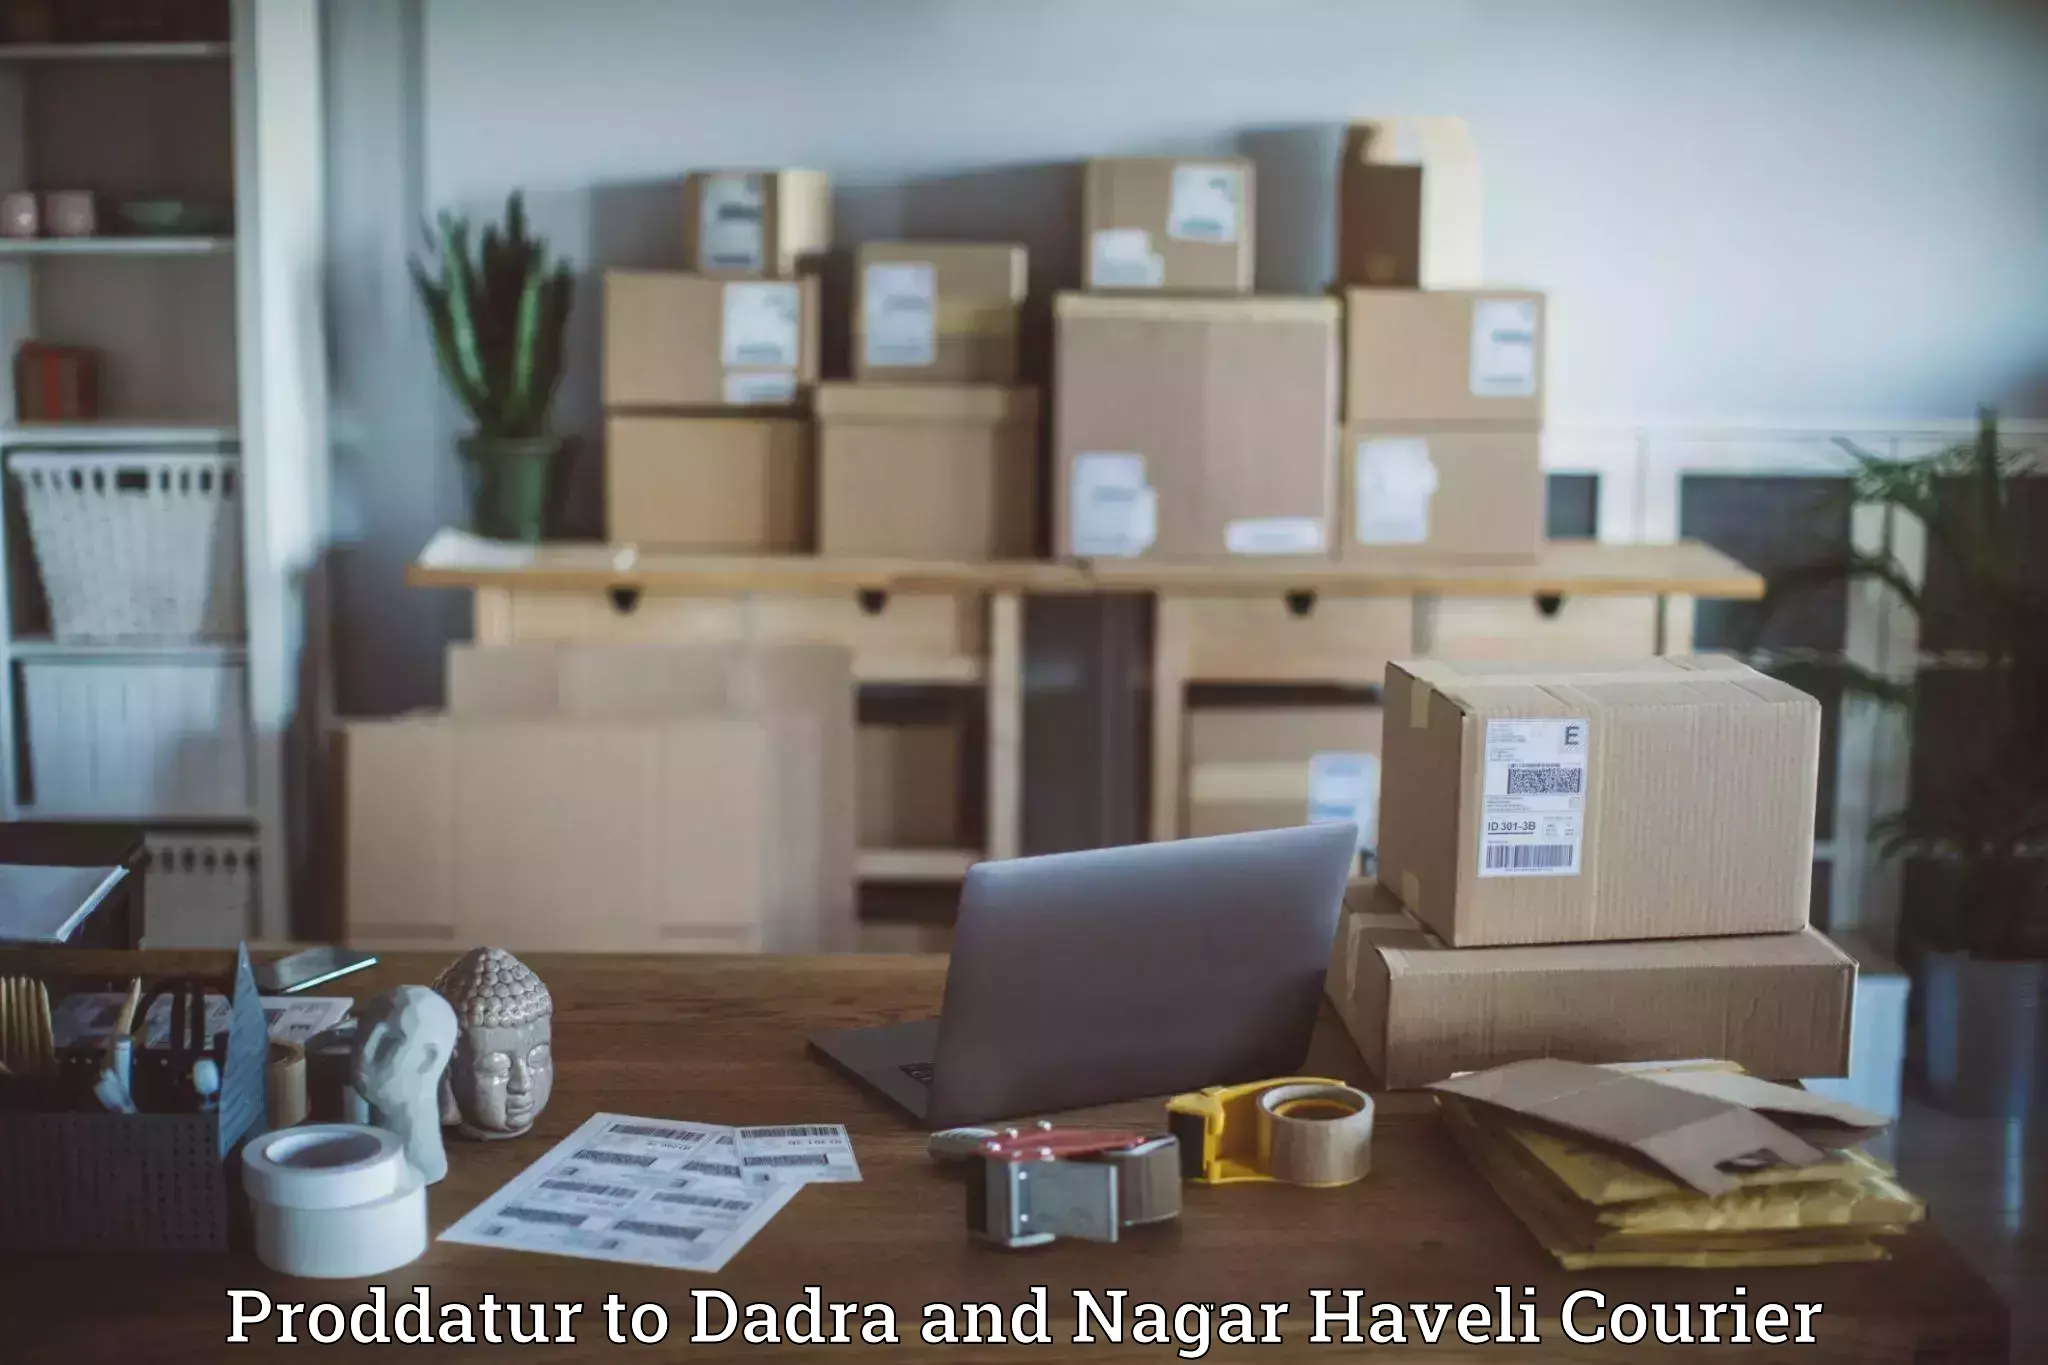 Express delivery solutions Proddatur to Dadra and Nagar Haveli